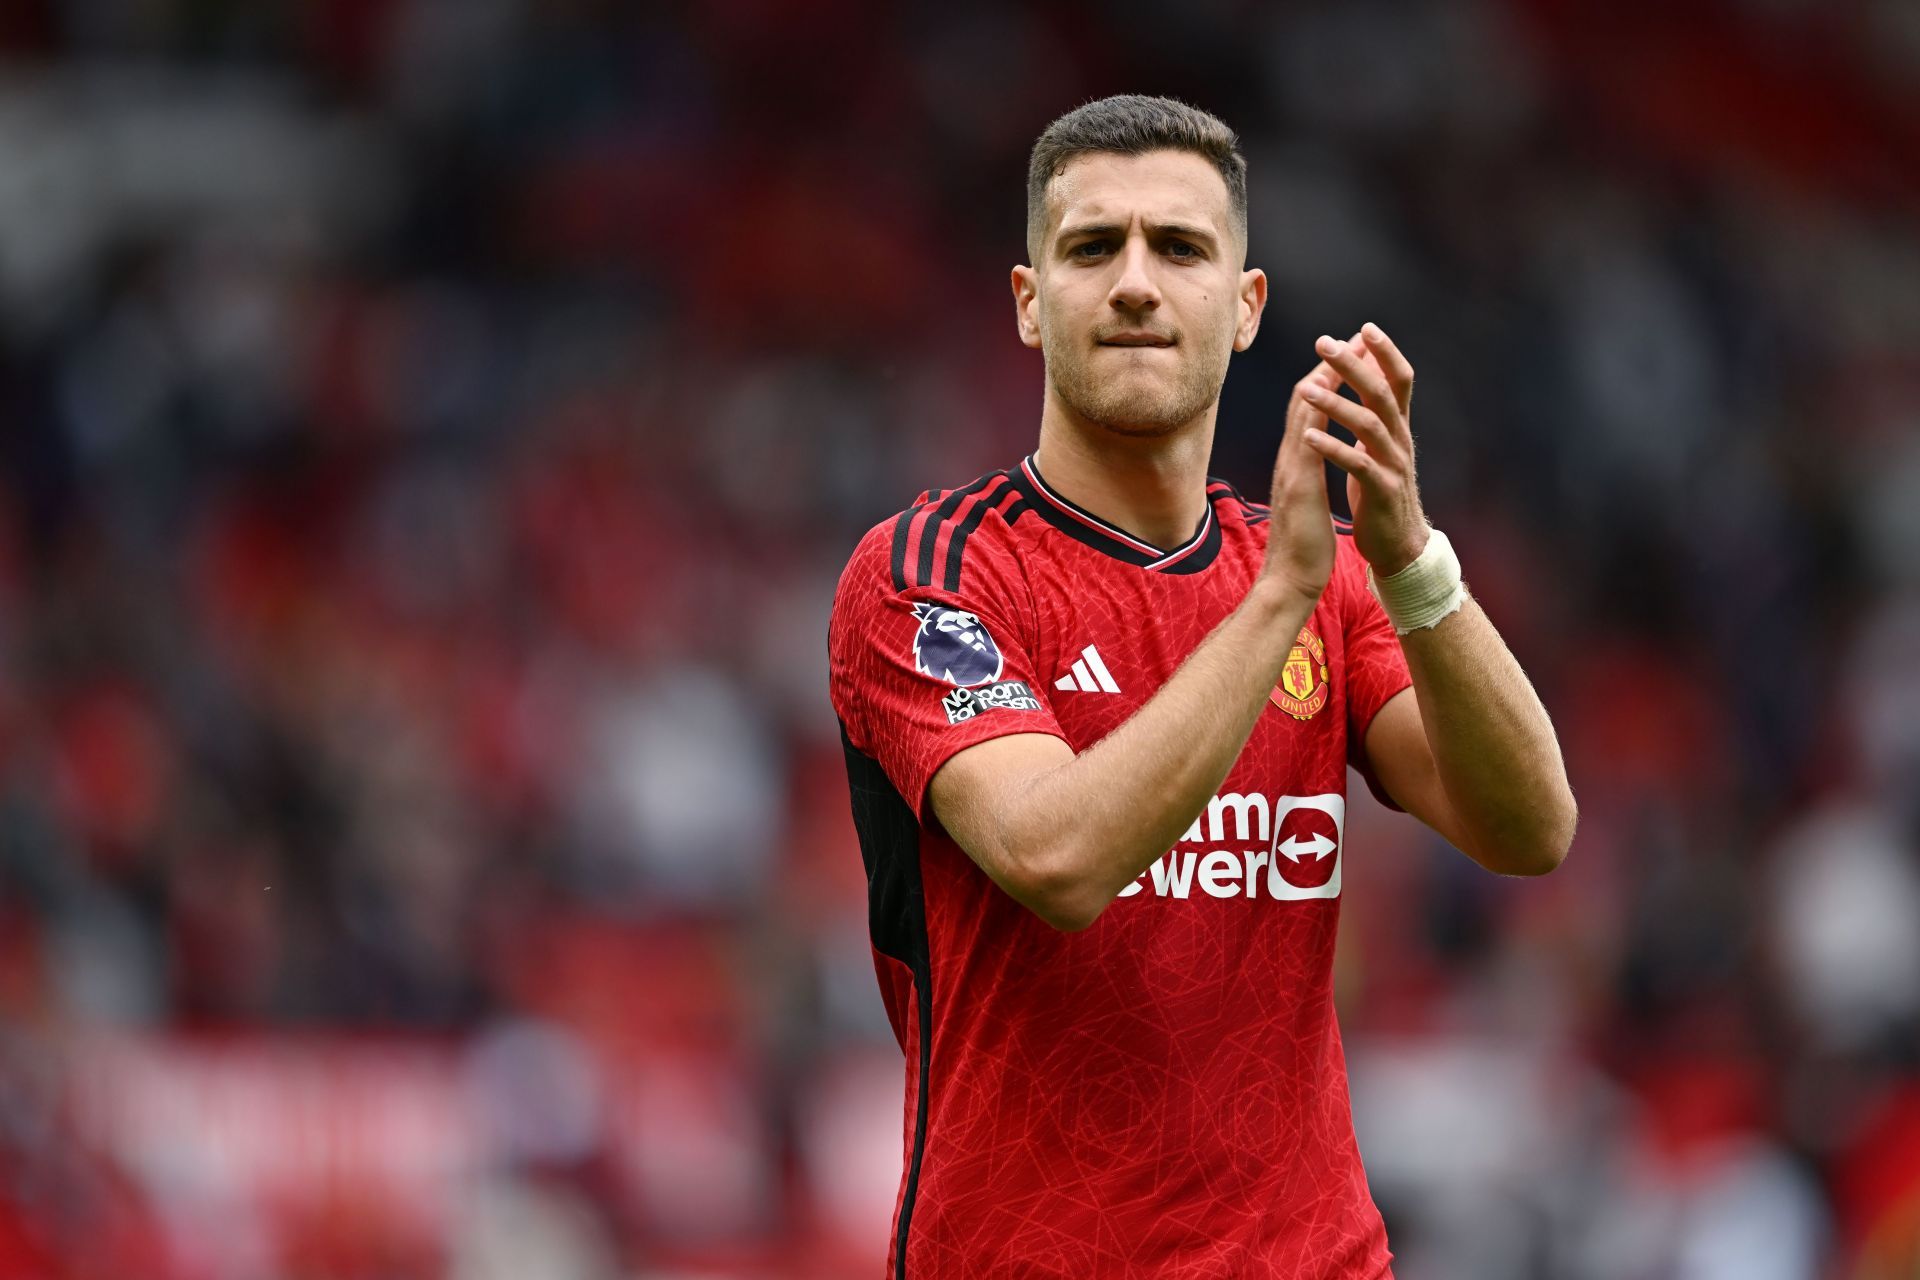 Diogo Dalot urges his side to keep the momentum going.